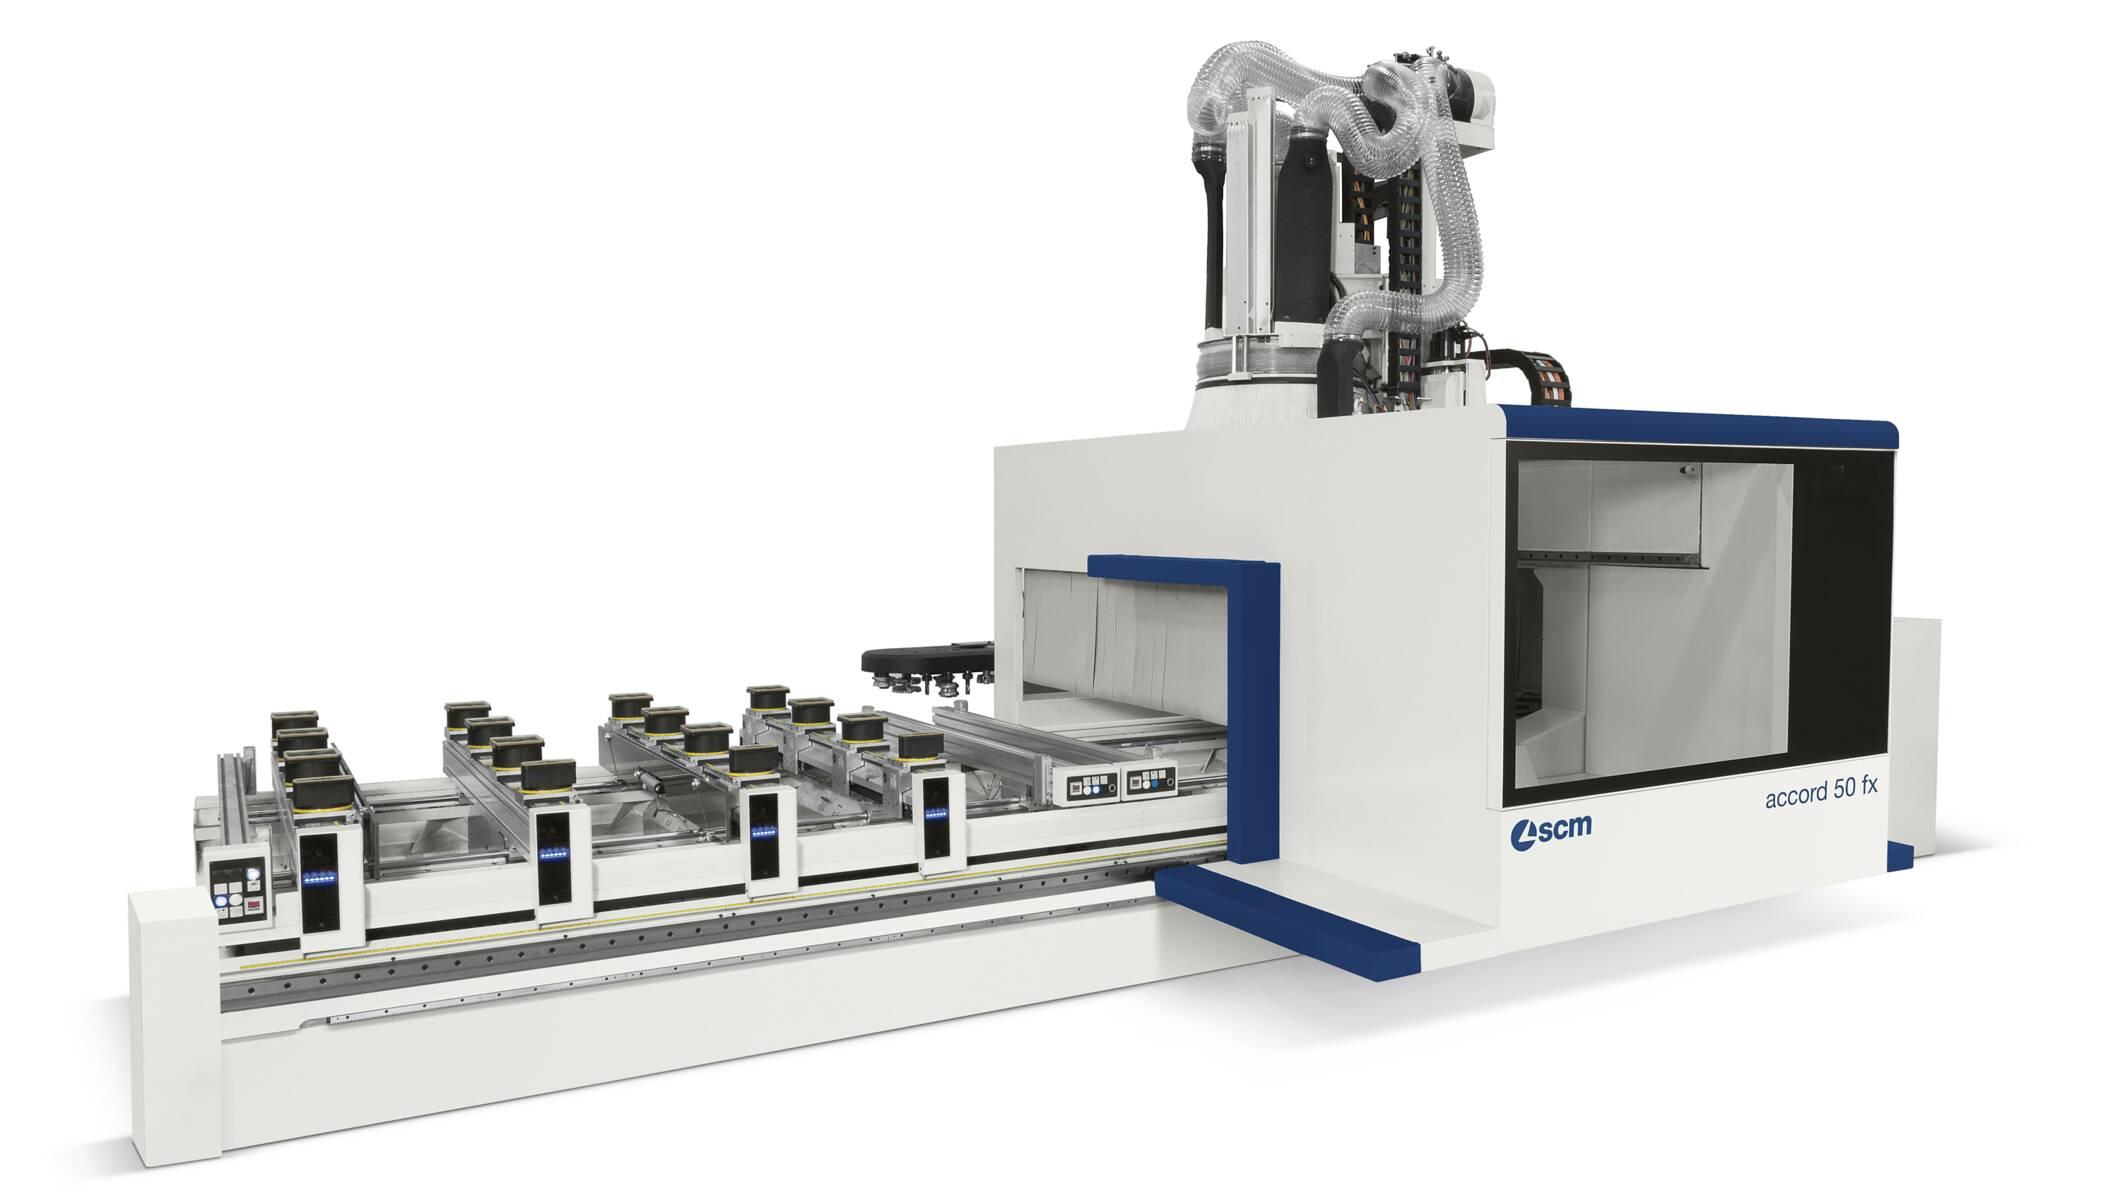 CNC Machining Centers - CNC Machining Centers for routing and drilling - accord 50 fx